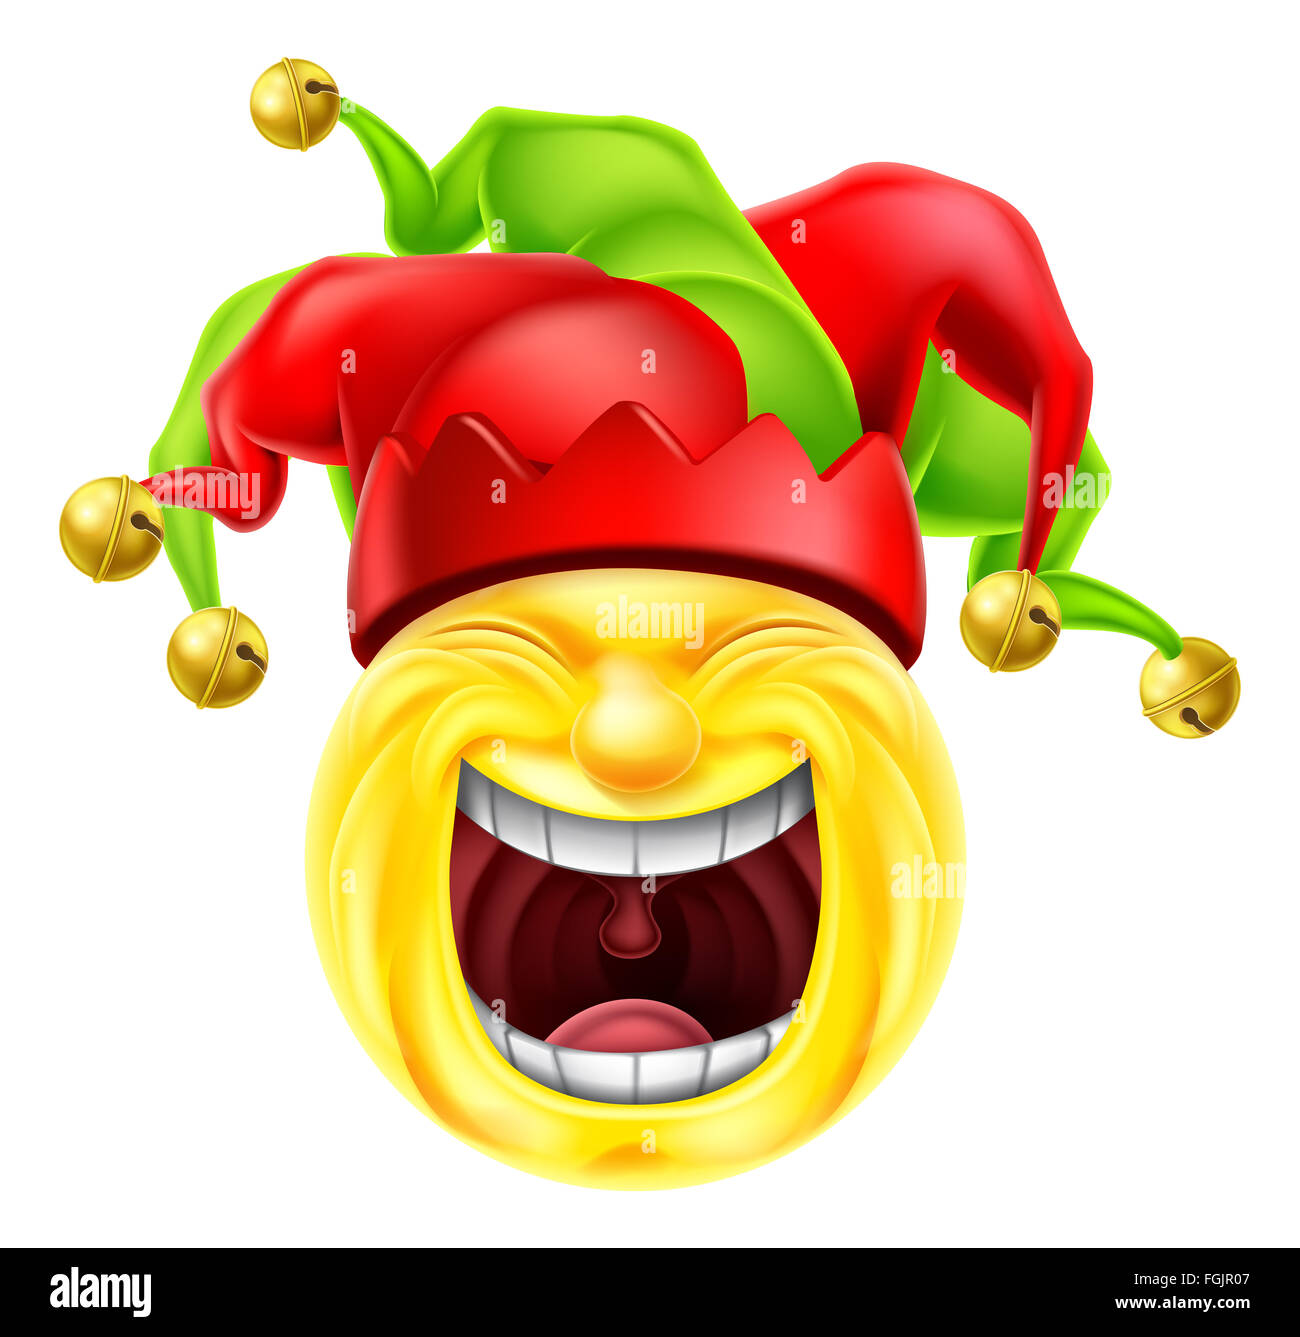 A jester cartoon emotion emoji icon laughing hysterically Stock Photo